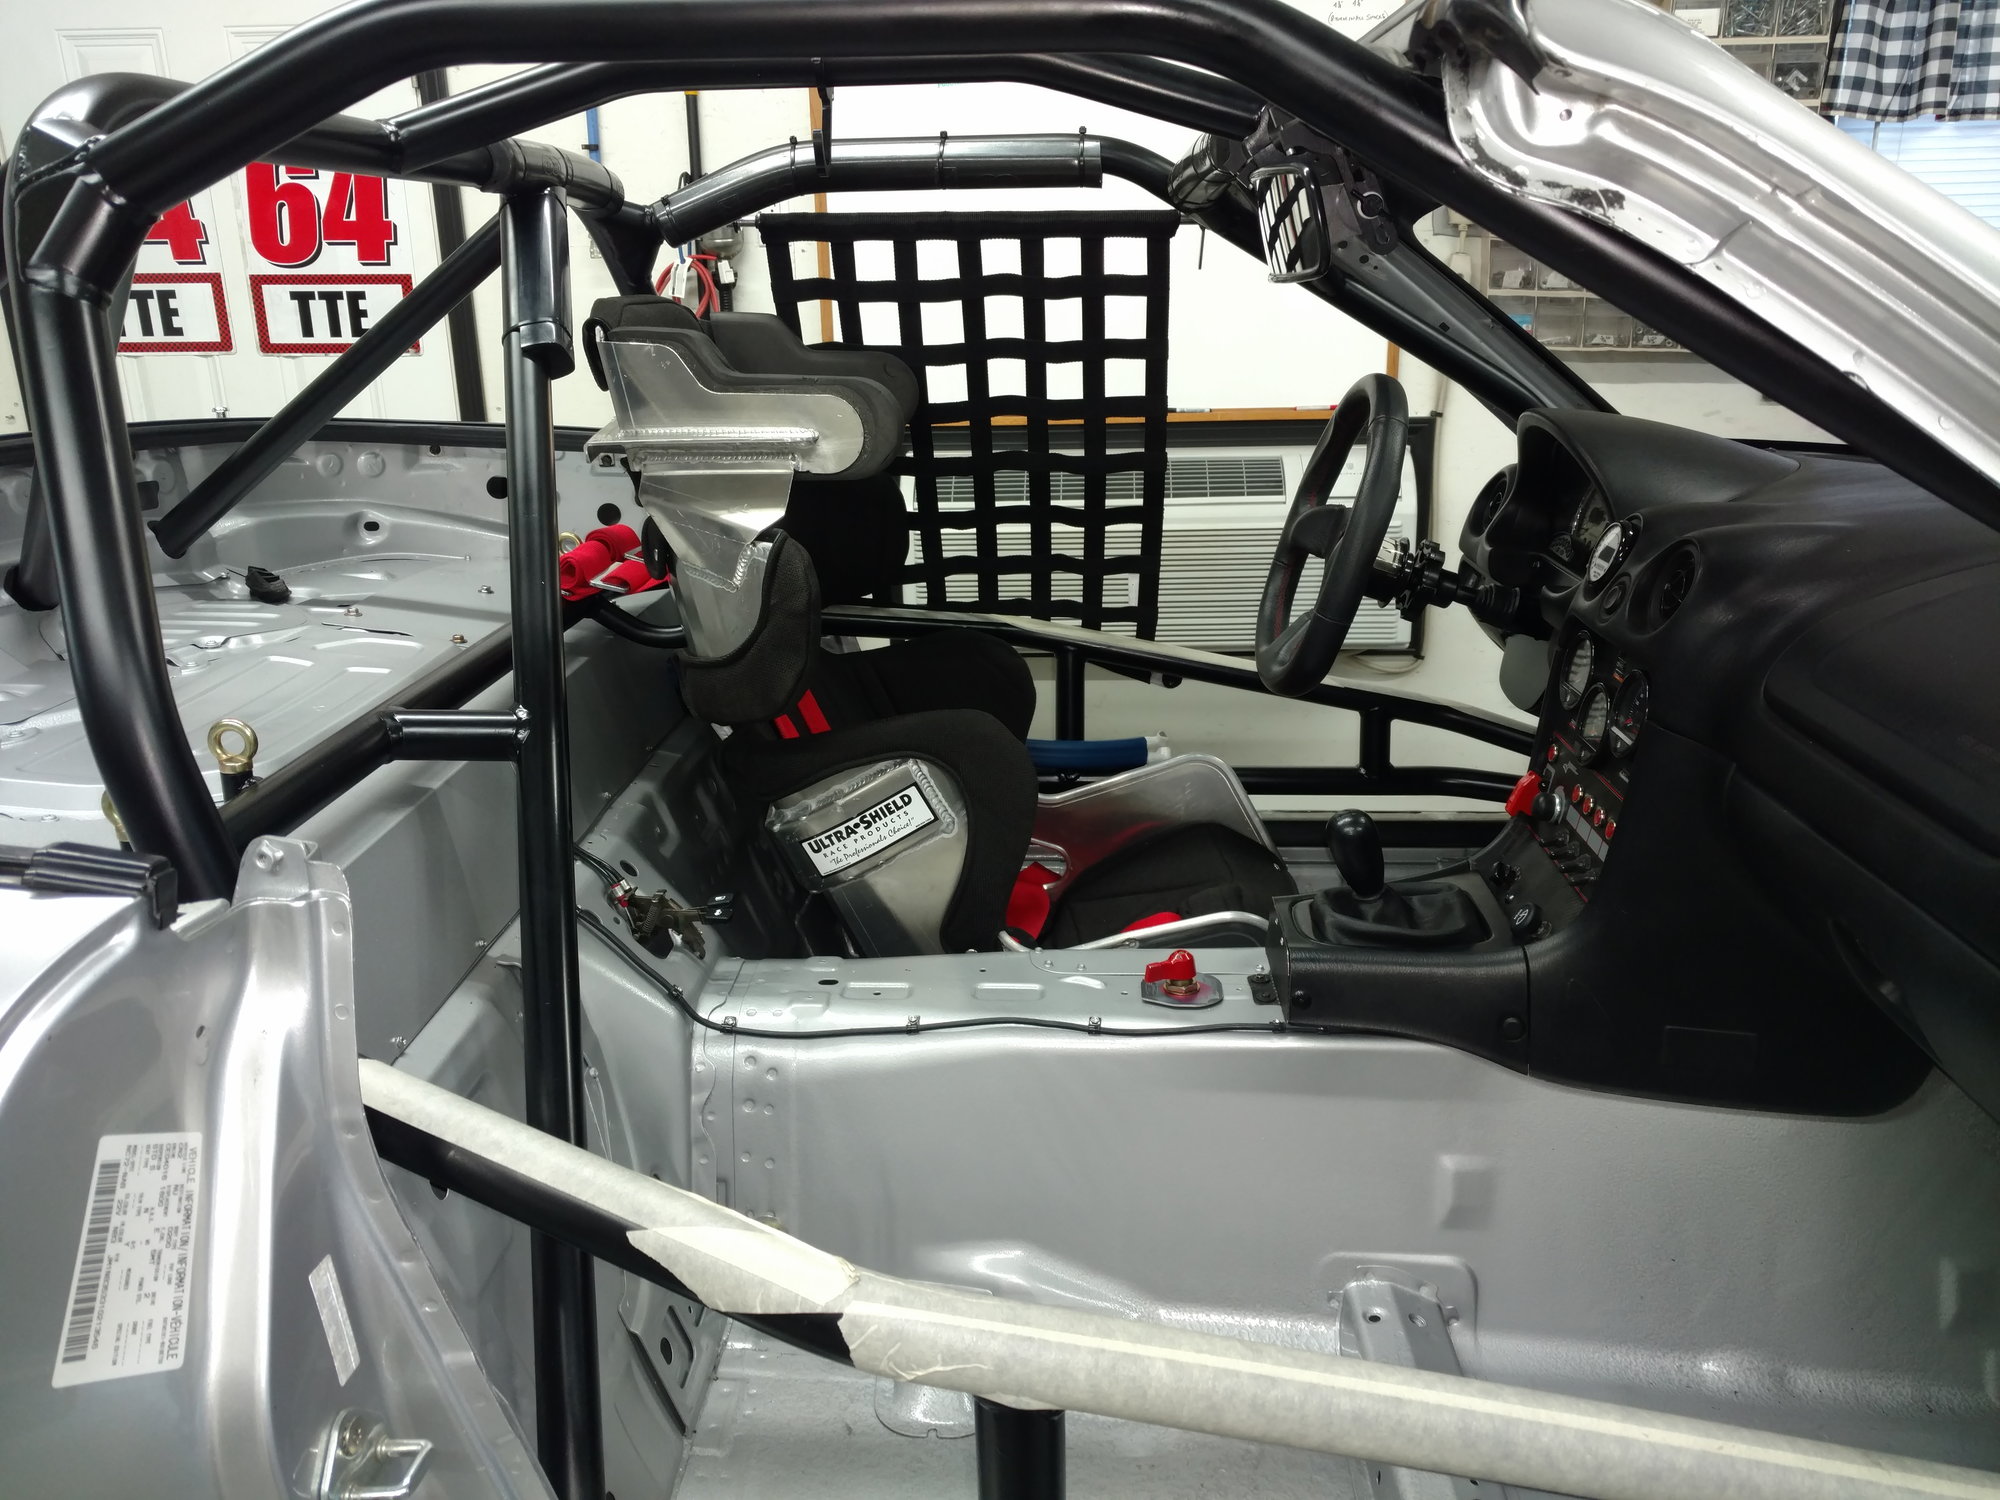 SFI Rated Low Profile High Impact Roll Bar Padding - 24 Hours of Lemons